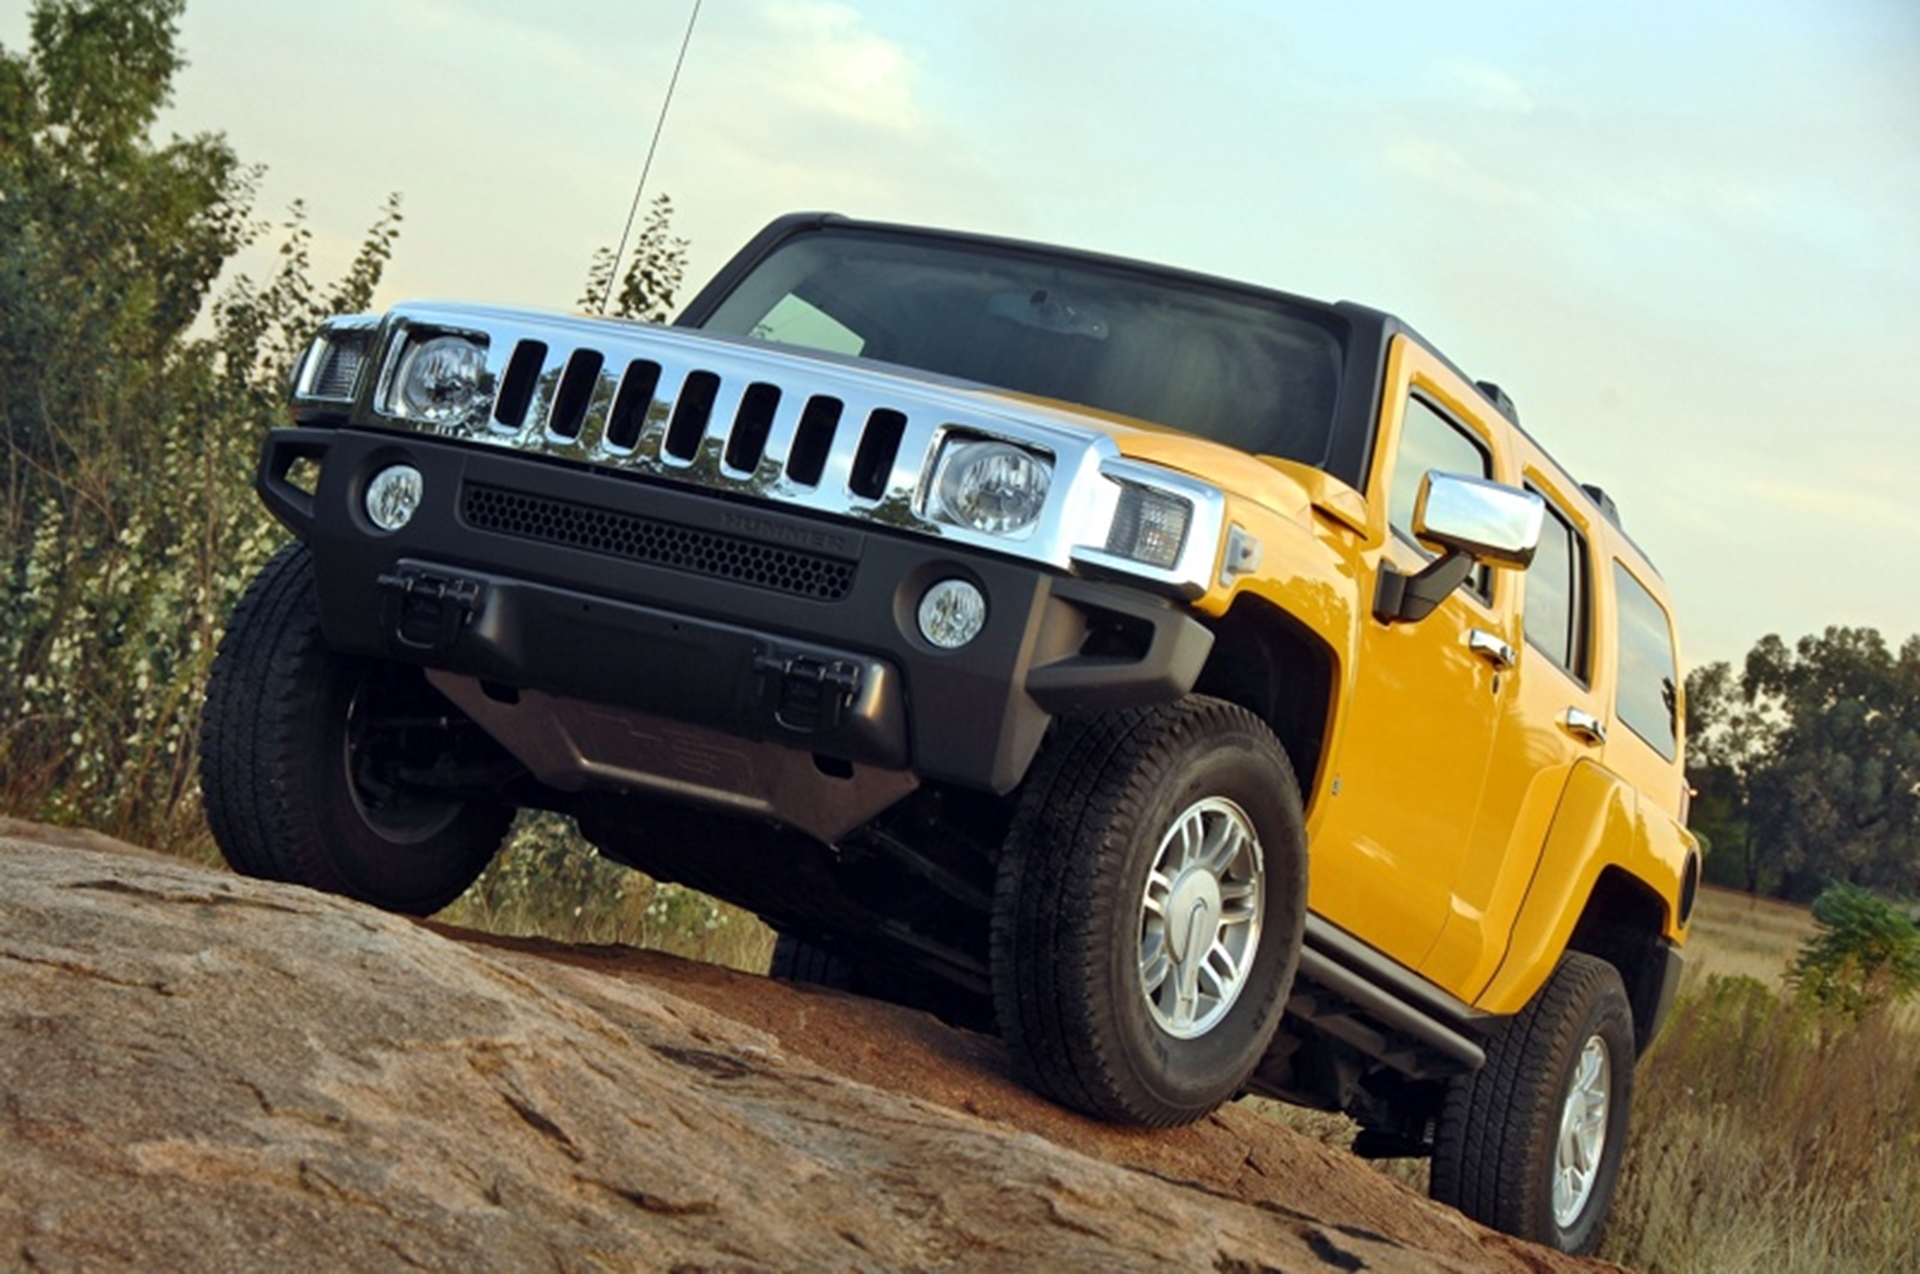 HUMMER H3 – ICONIC HUMMER STYLING IN A MID-SIZE PACKAGE